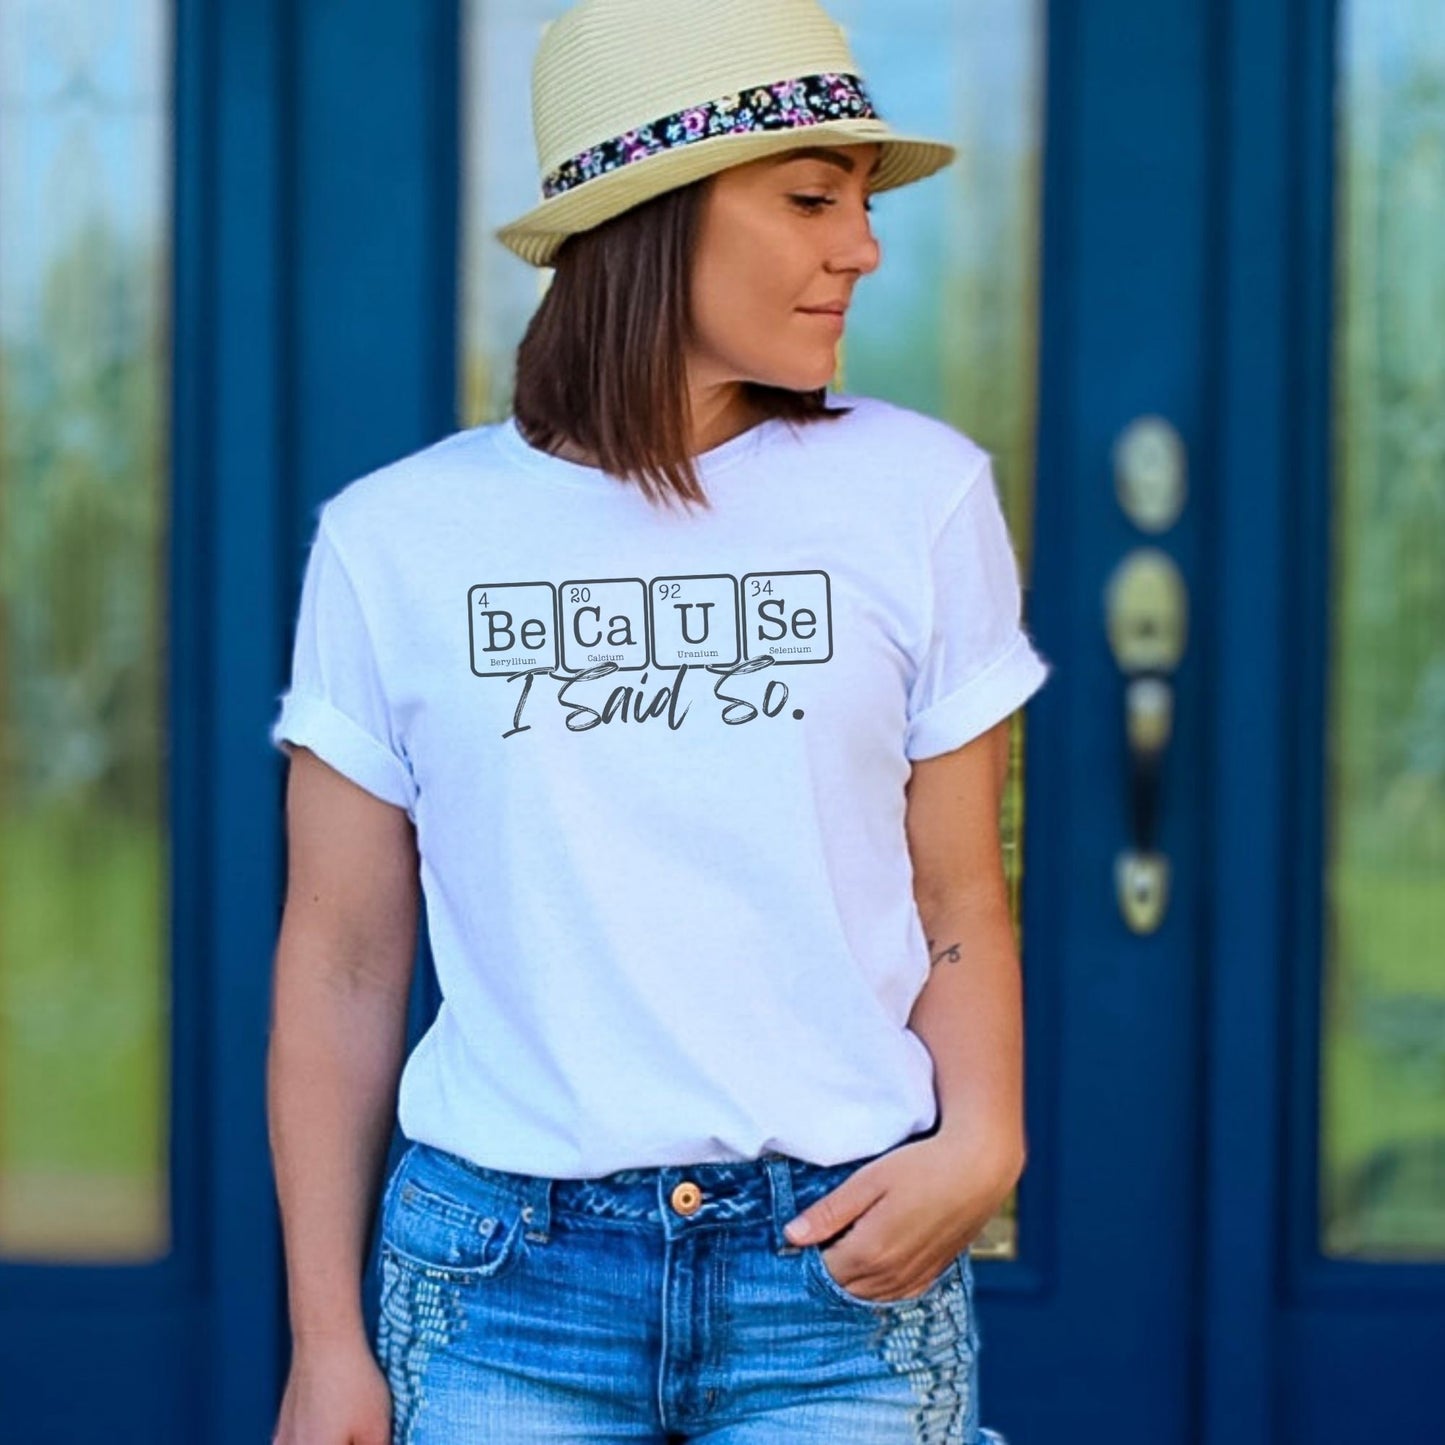 a woman wearing a white t - shirt with periodic table design for the text that says "because I said so", wearing blue jeans and a straw hat